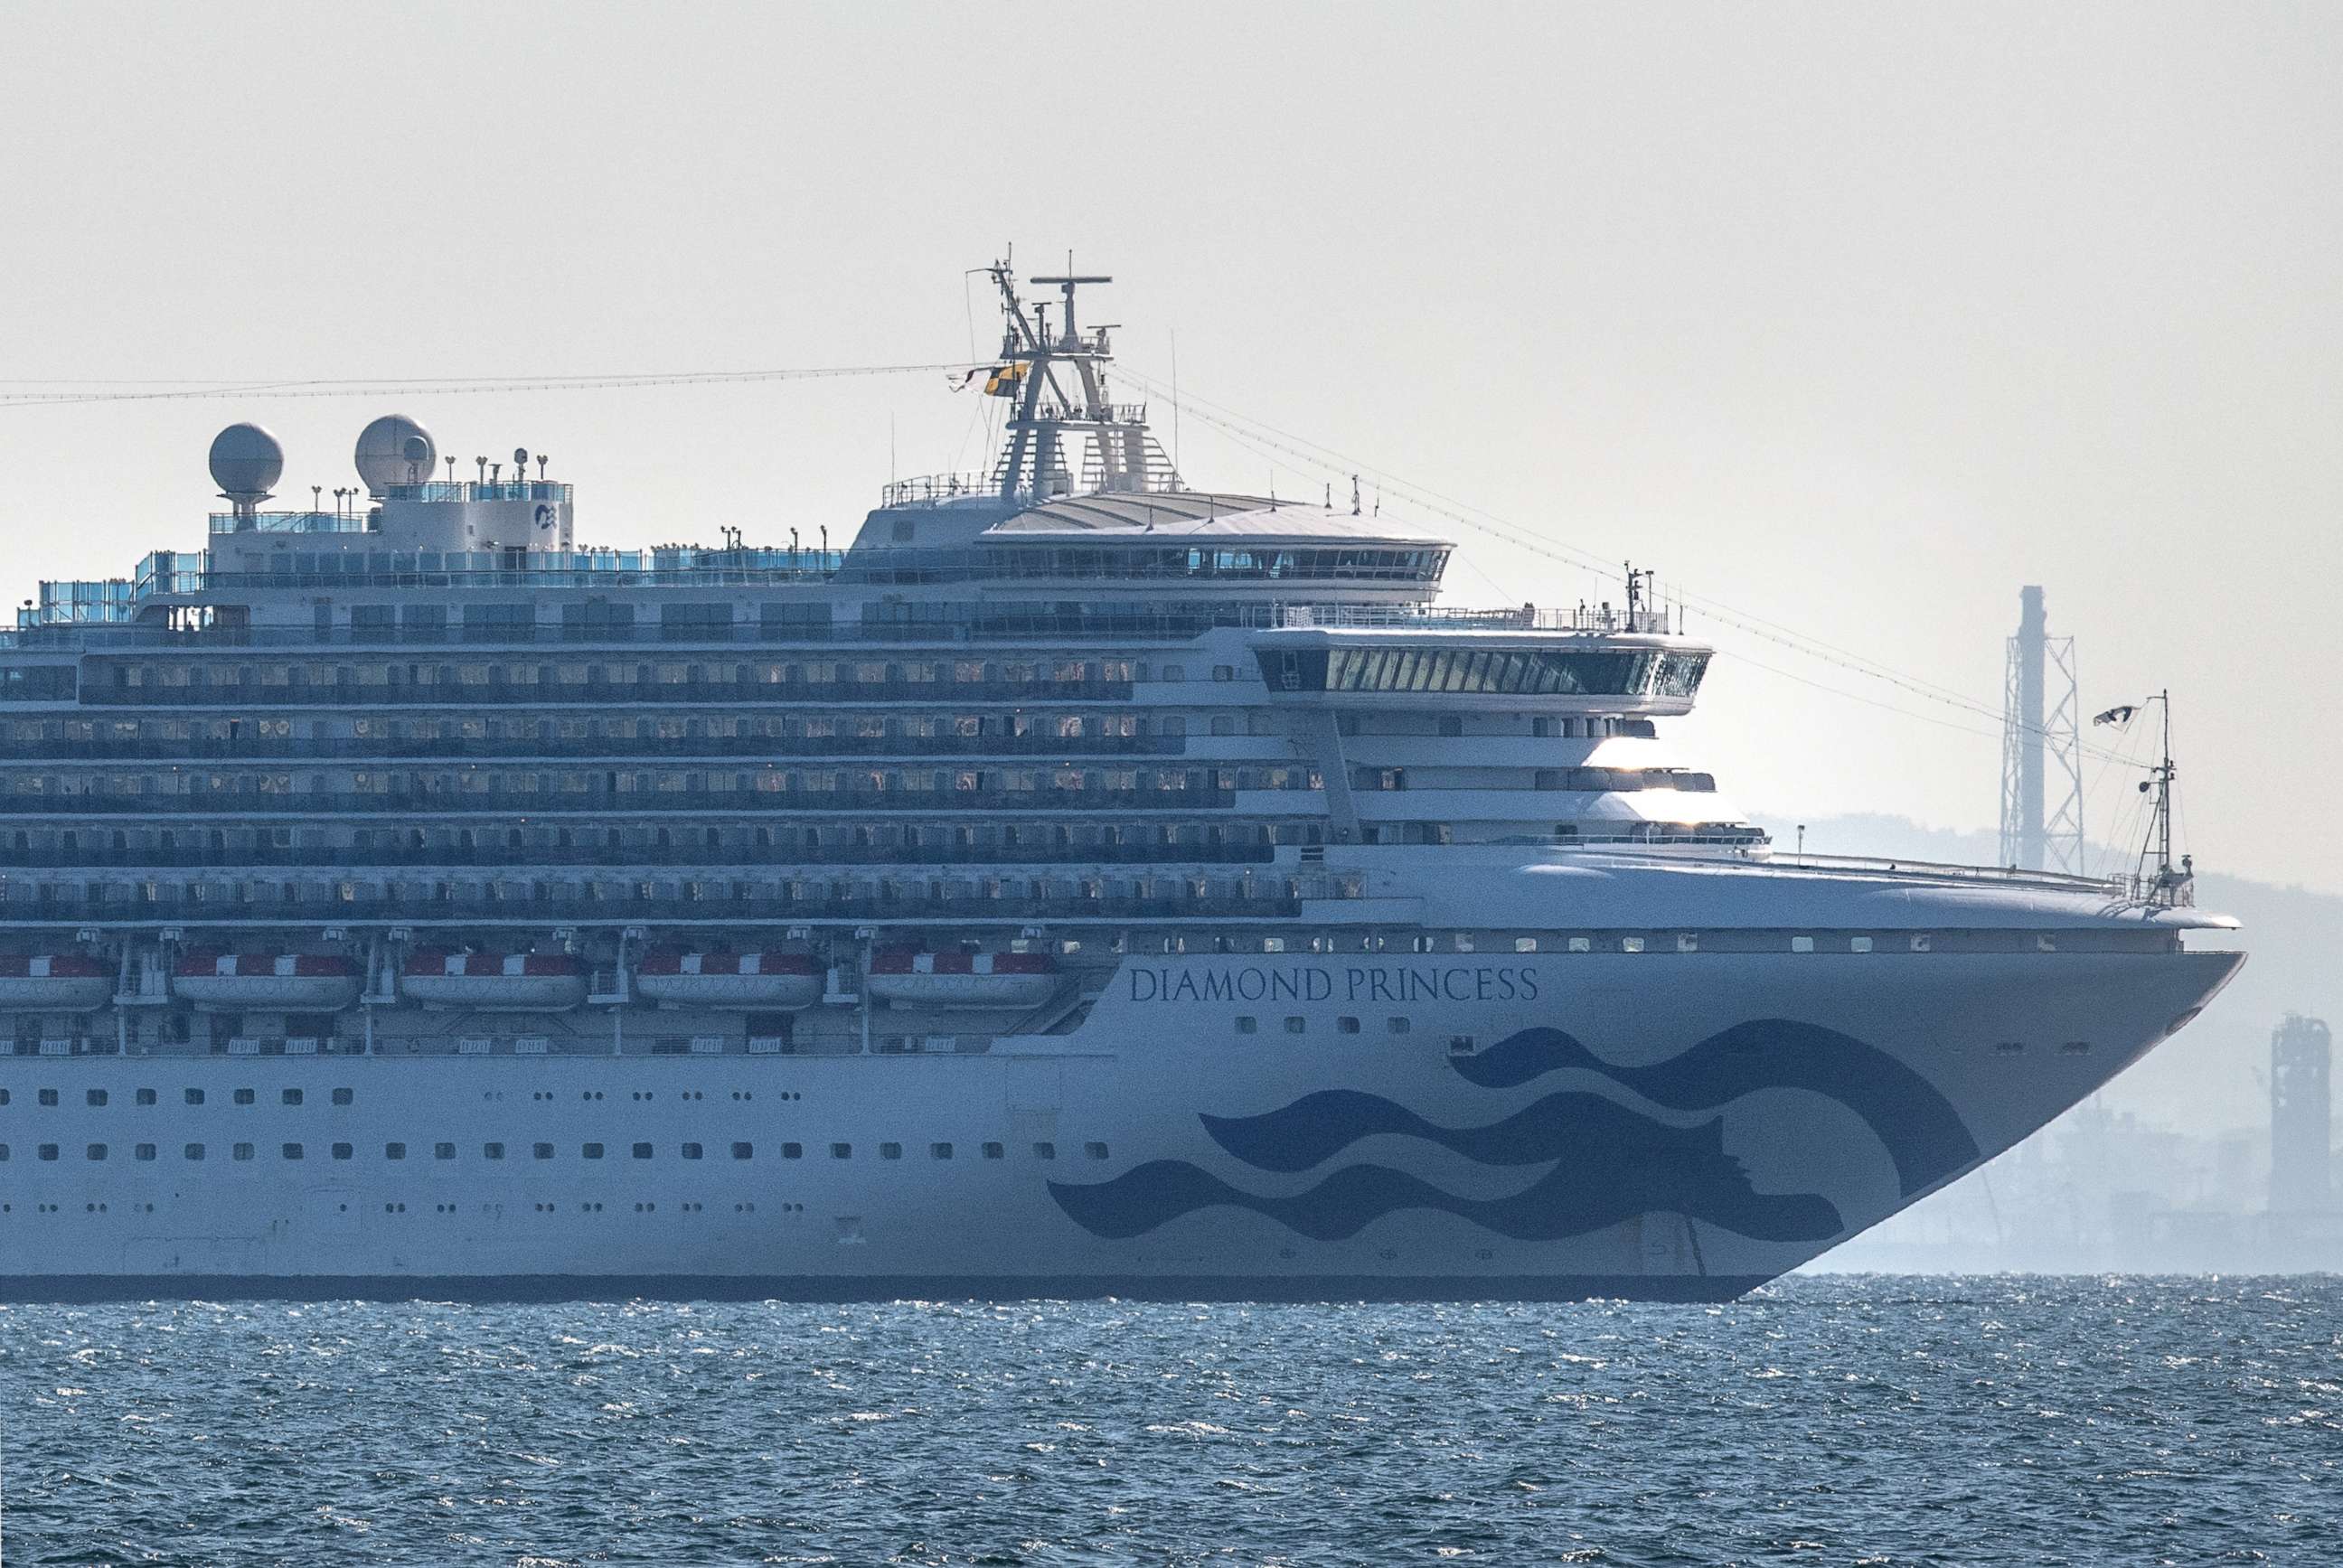 PHOTO: The Diamond Princess cruise ship with around 3,700 people on board sits anchored in quarantine off the Japanese port of Yokohama on Feb. 5, 2020, after a number of passengers tested positive for the new coronavirus.